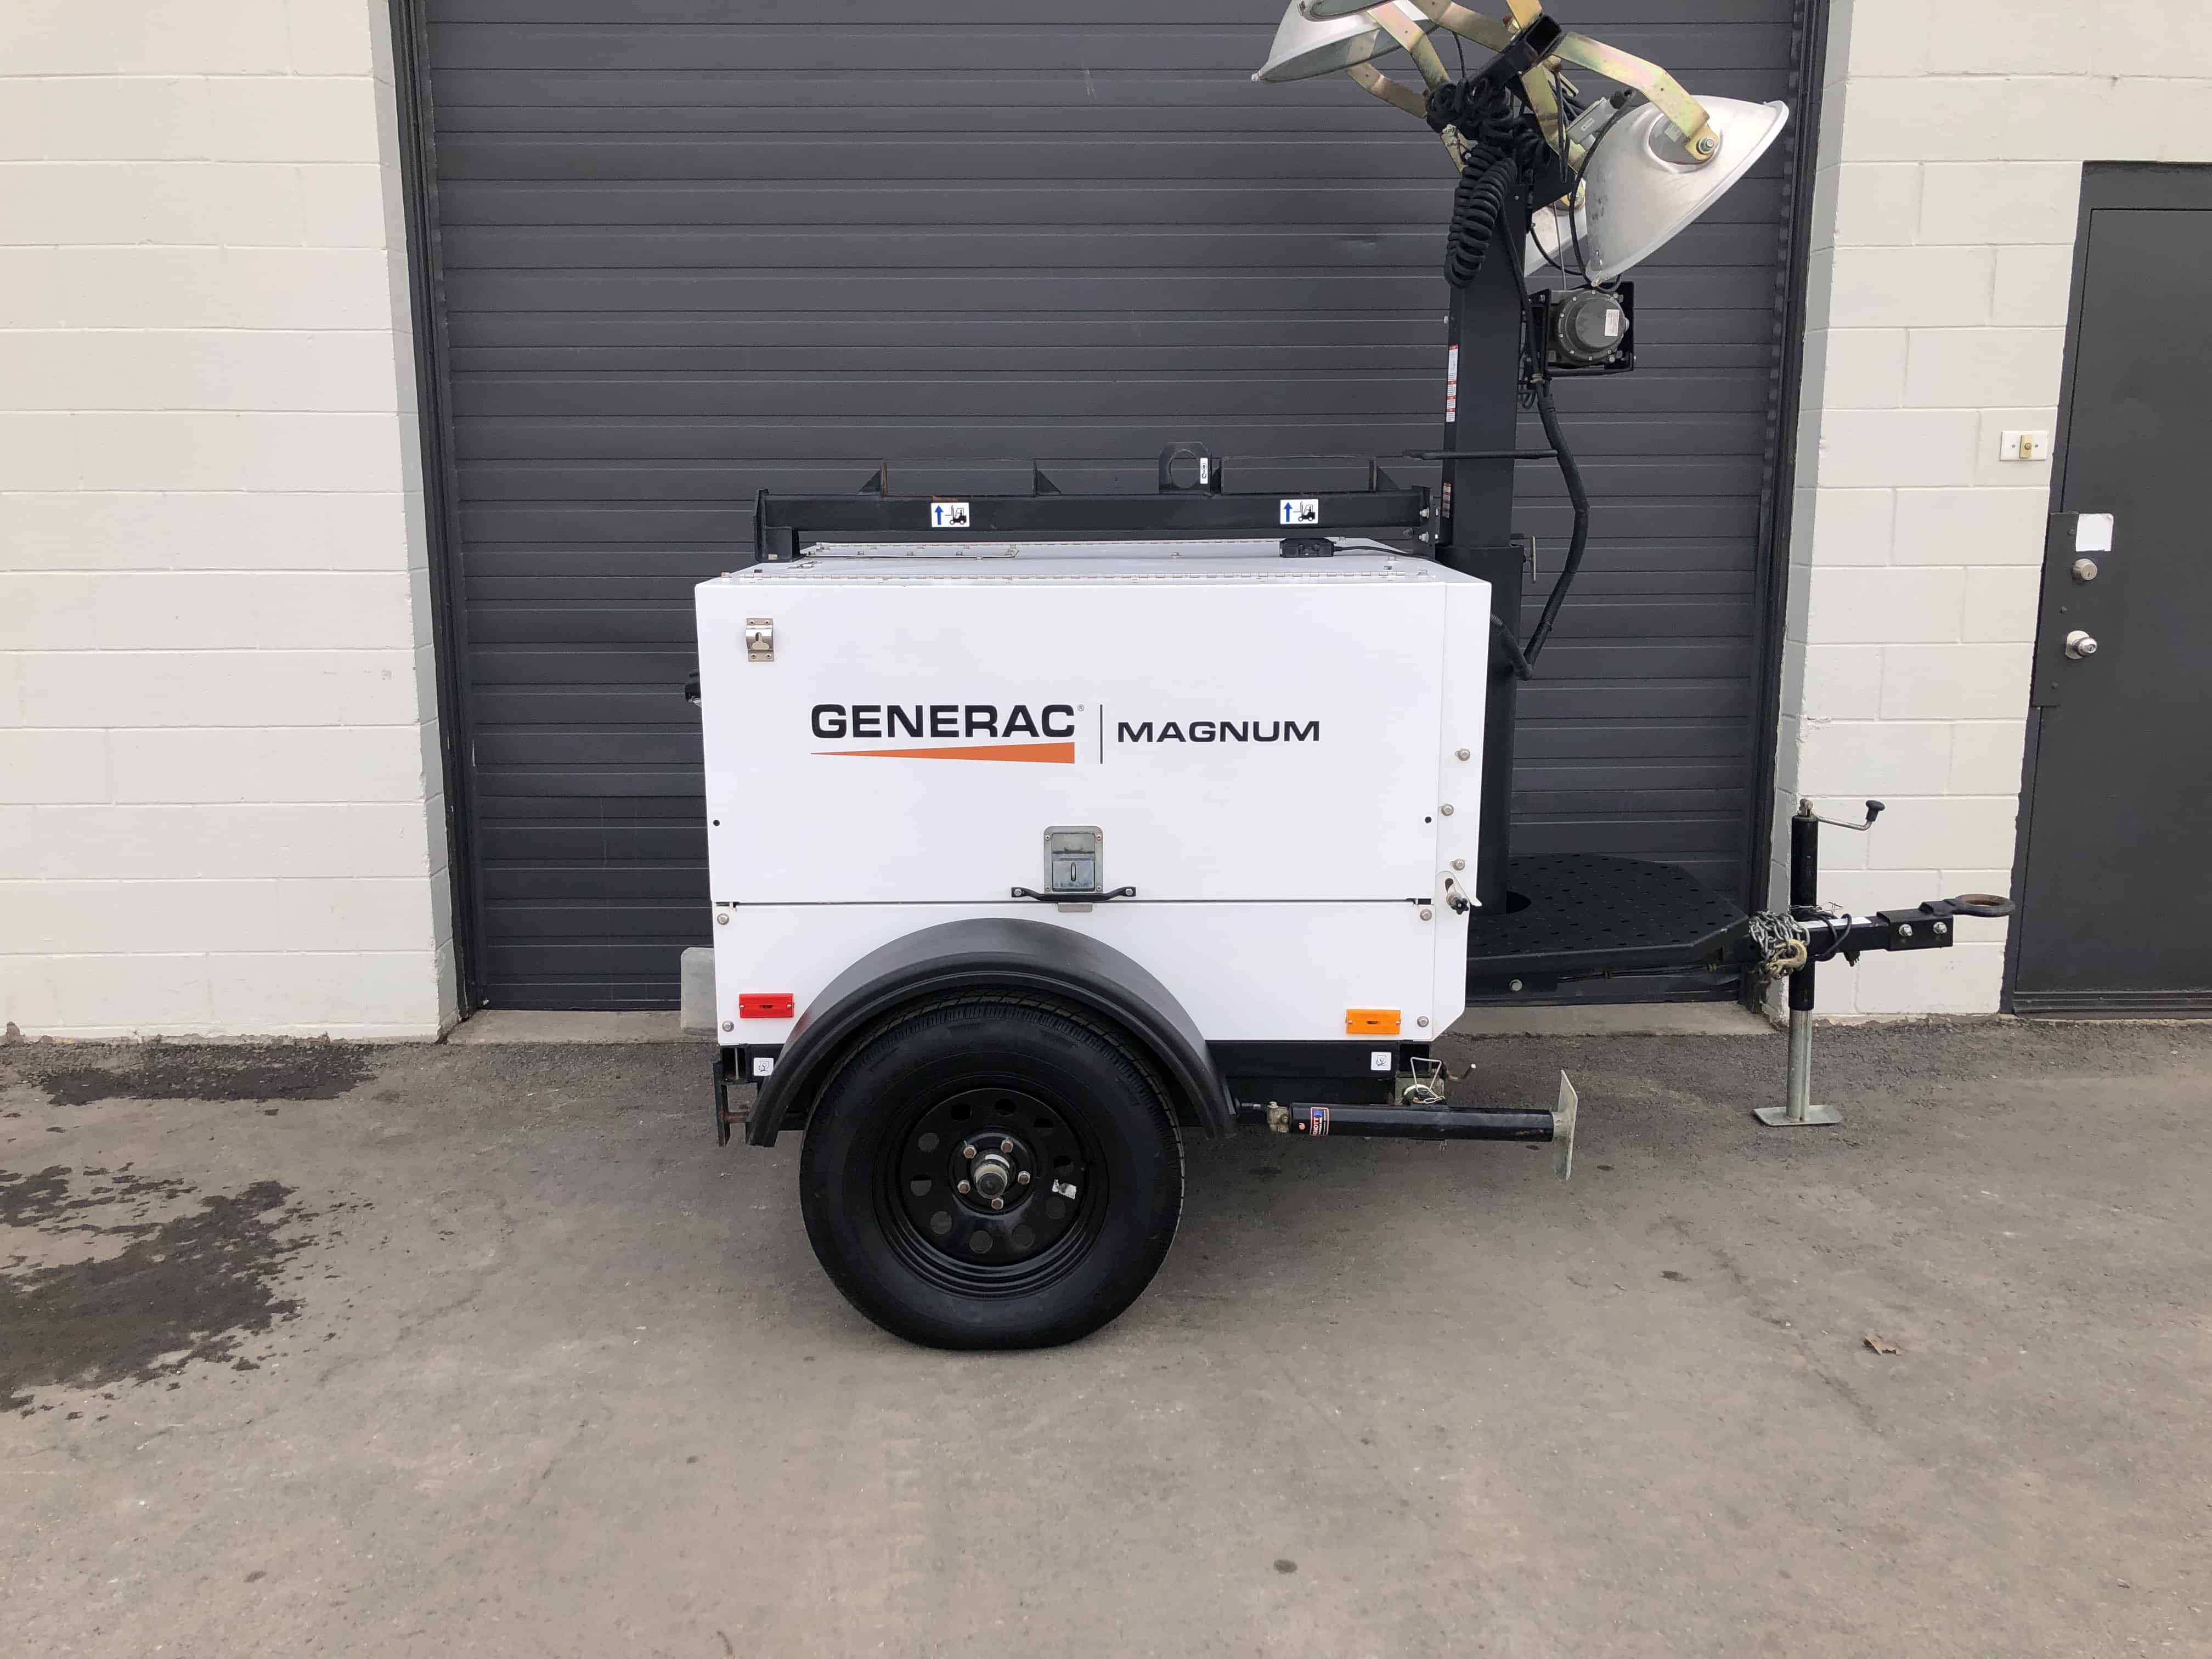 Generac MLT5080 light tower for sale diesel 8kw tow behind in Calgary, AB Canada